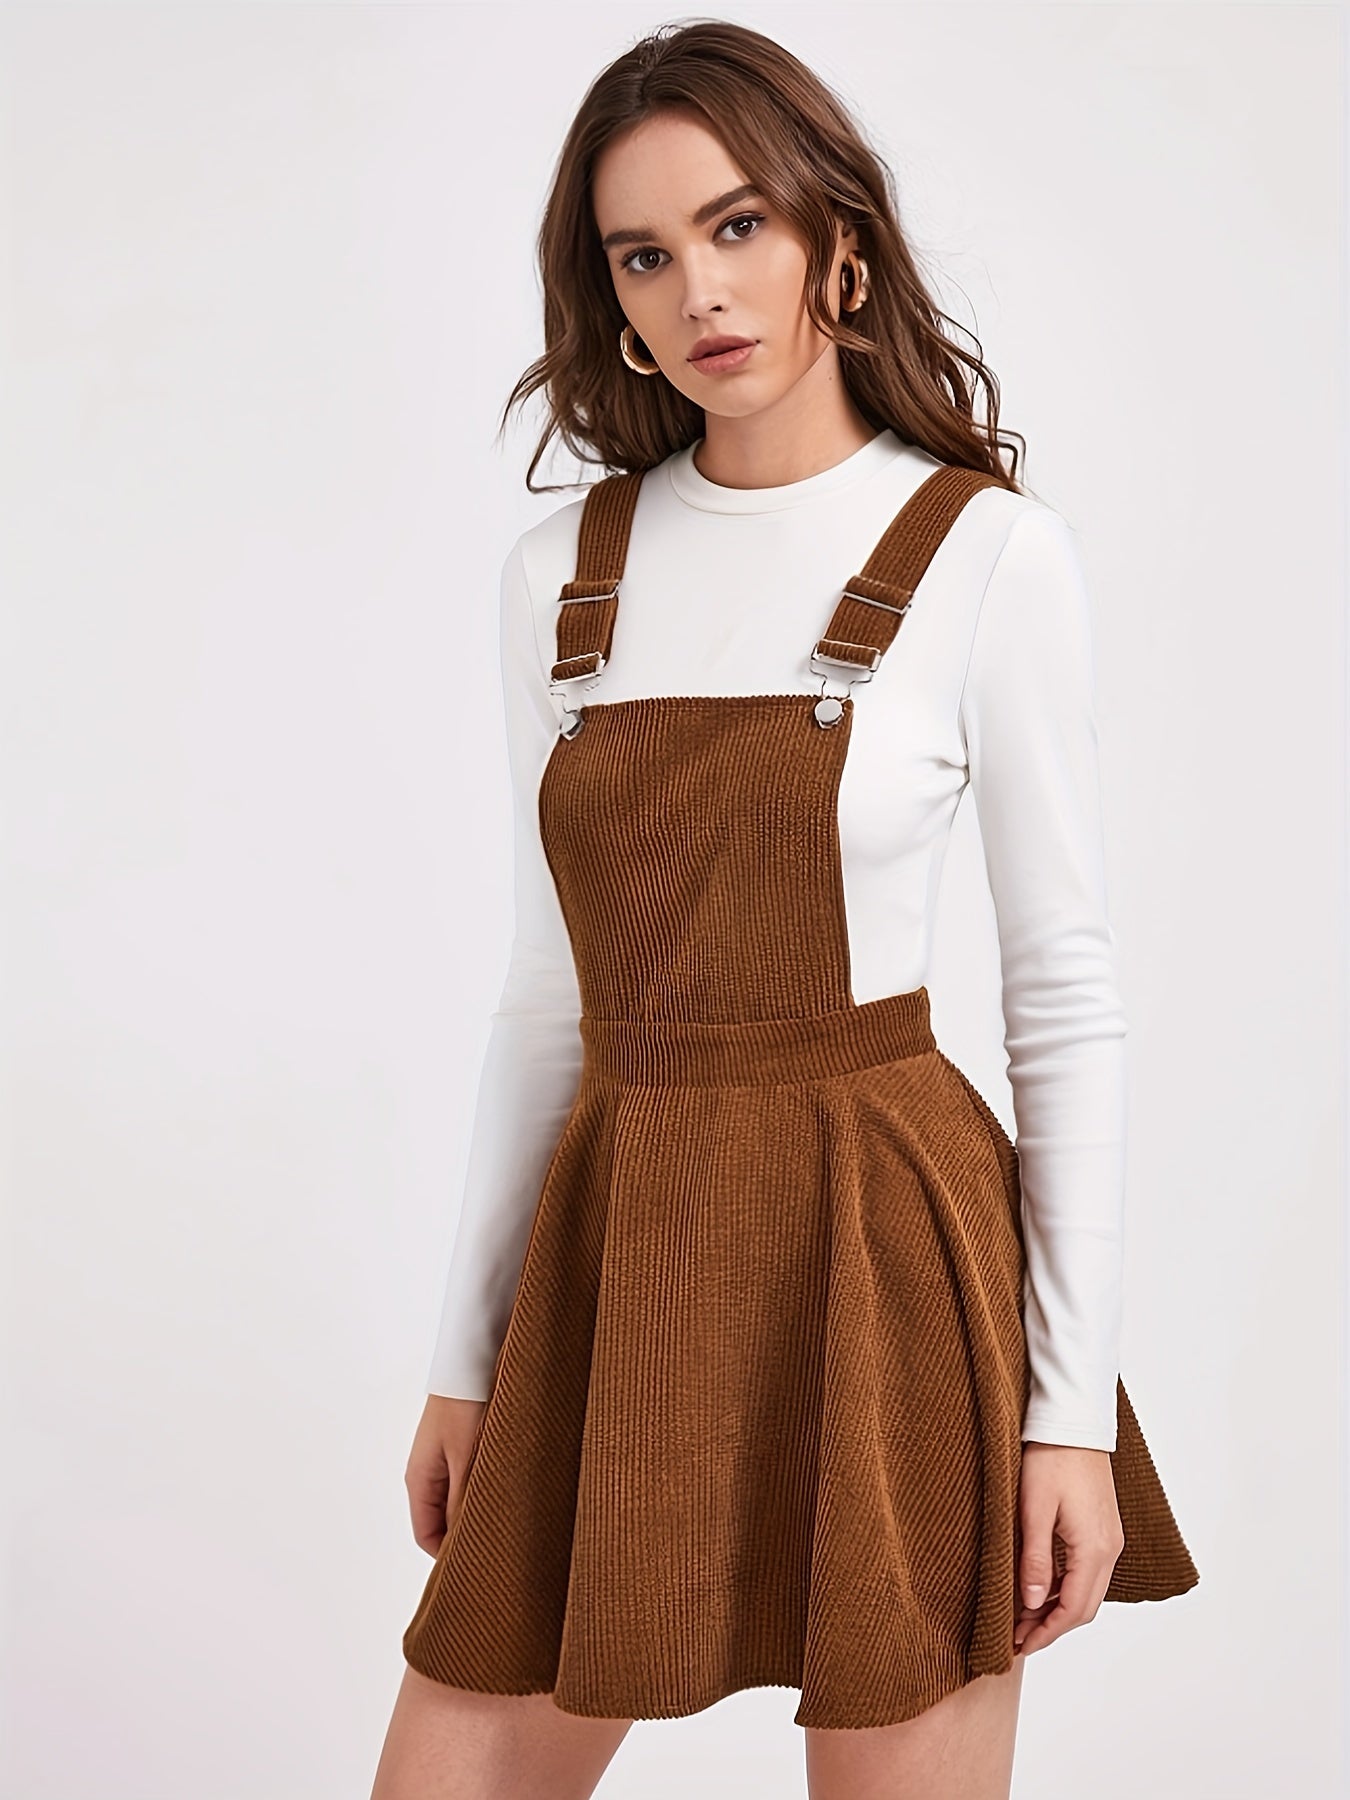 Antmvs Solid Adjustable Straps Dress, Elegant Sleeveless A Line Corduroy Pinafore Overall Dress, Women's Clothing